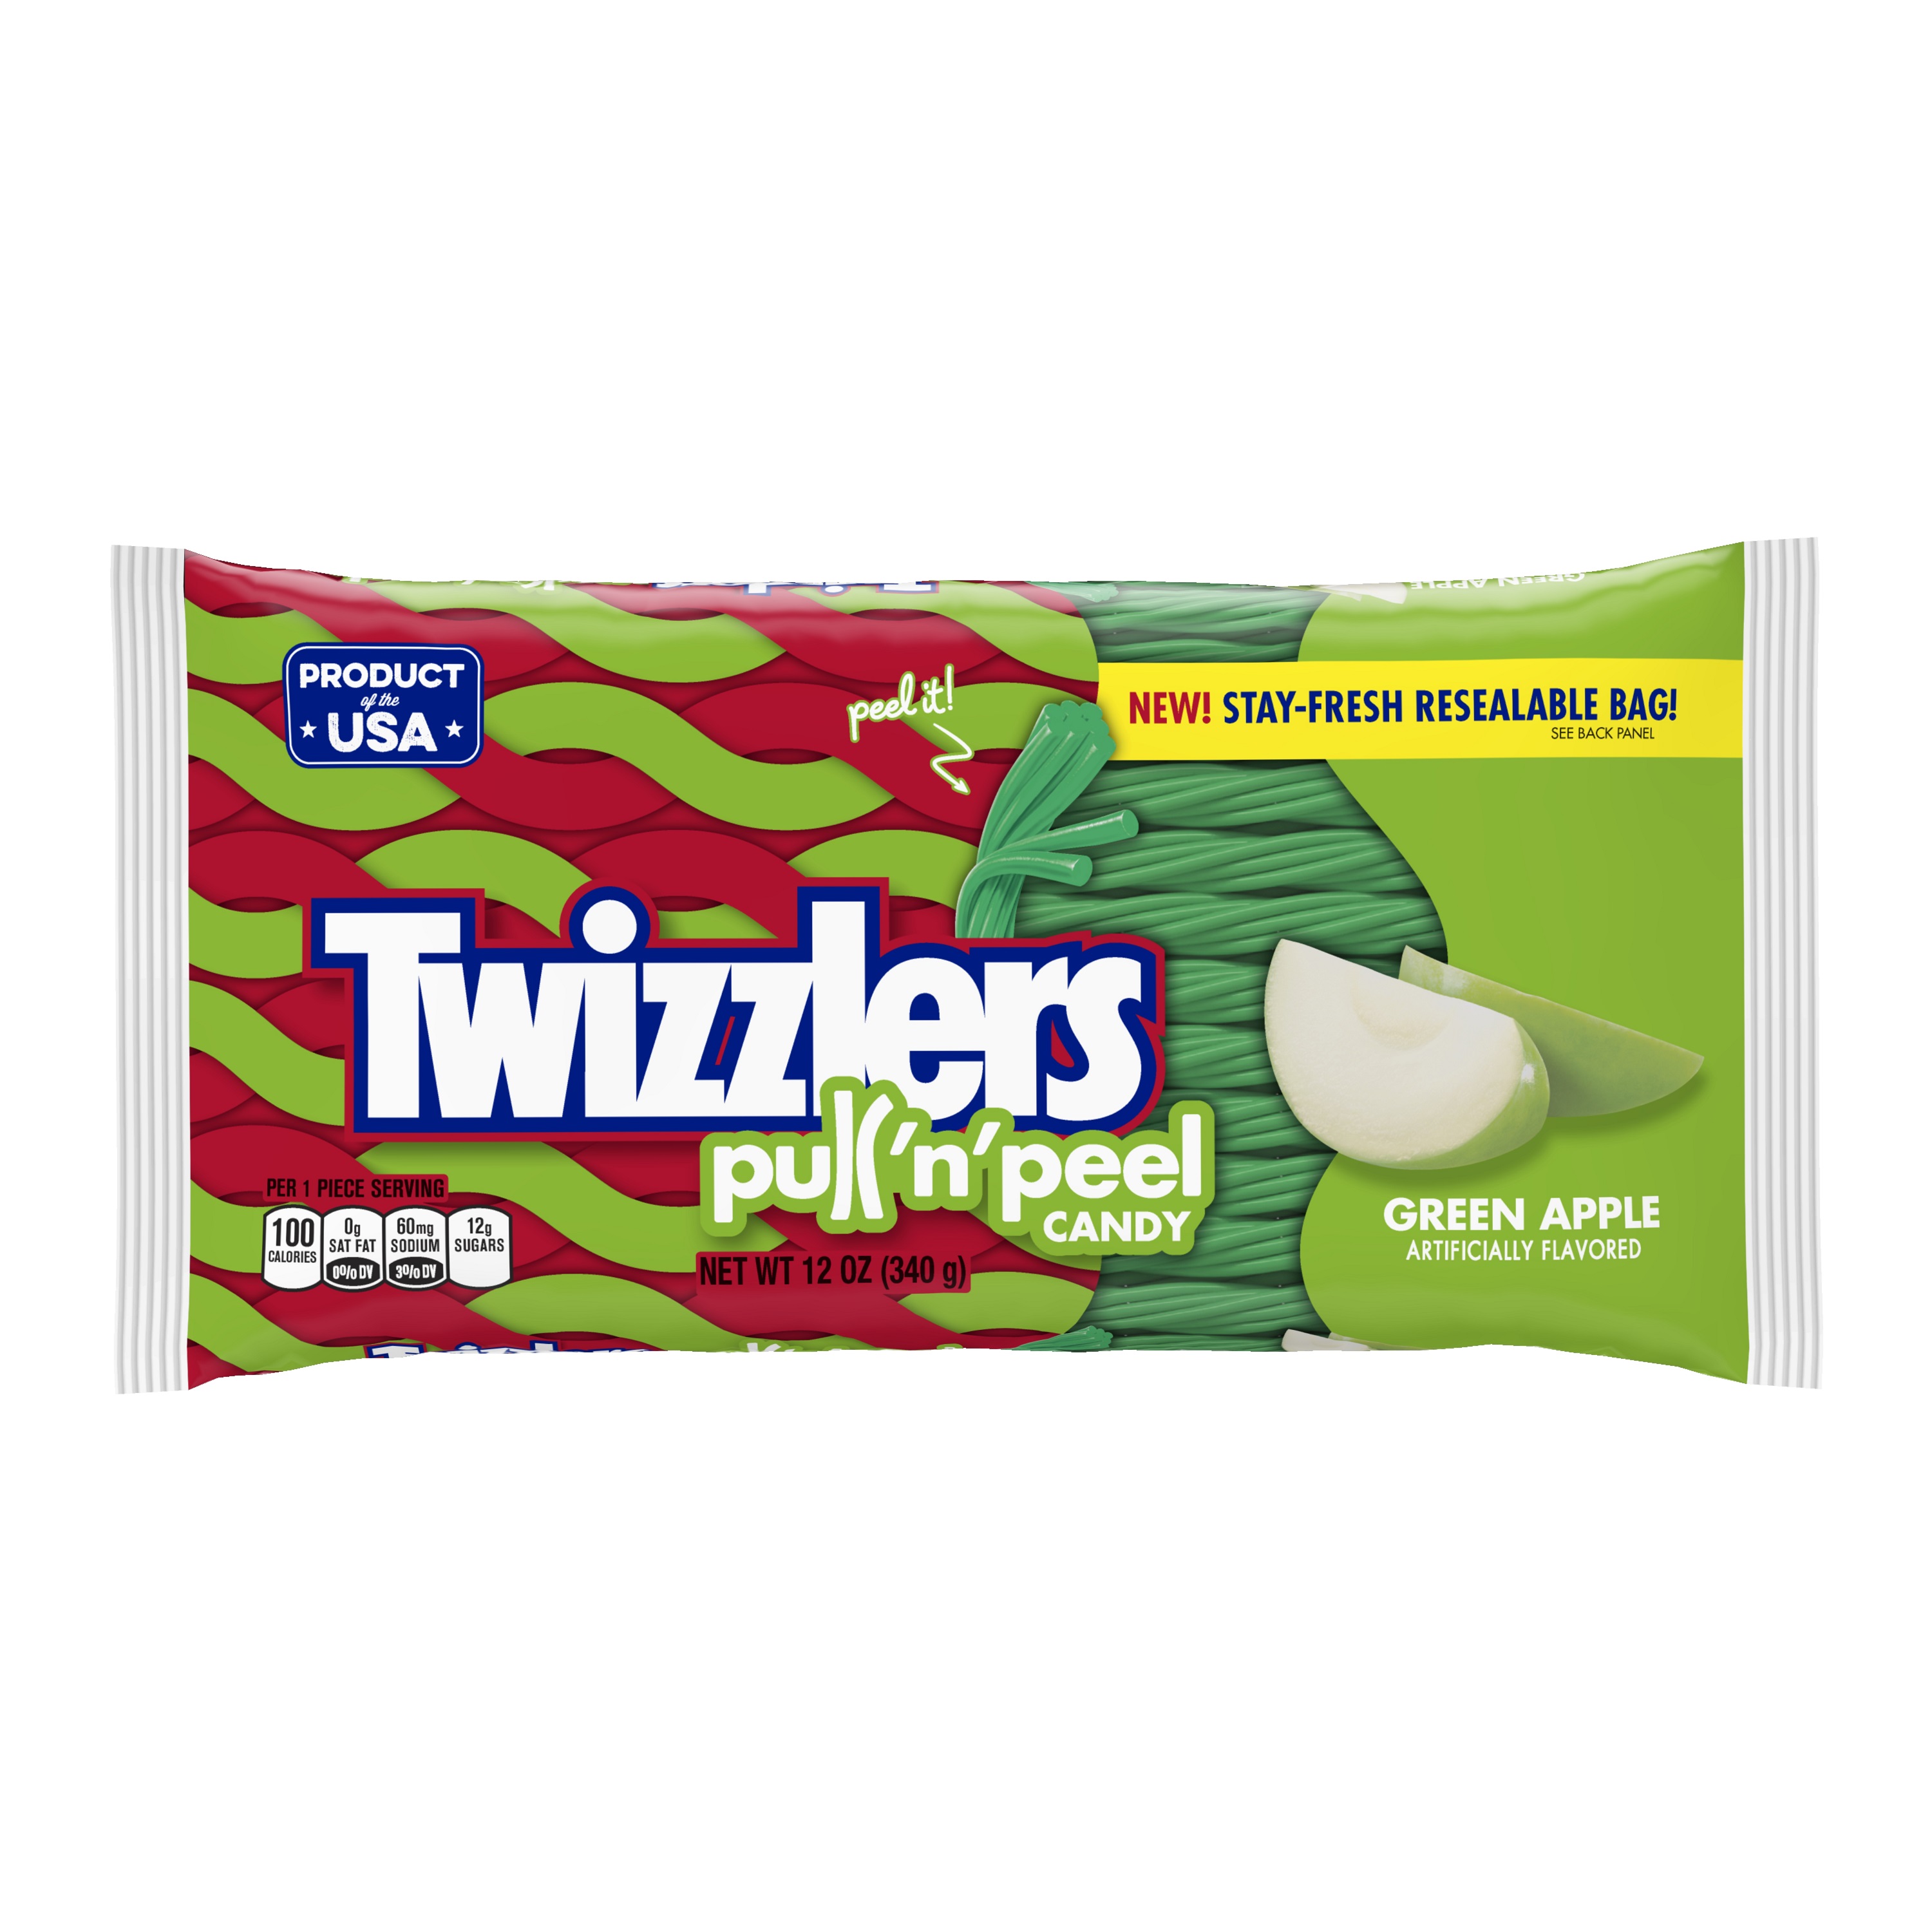 Twizzlers Pull 'n' Peel Green Apple Flavored Chewy Candy, 12 Oz. - image 2 of 3